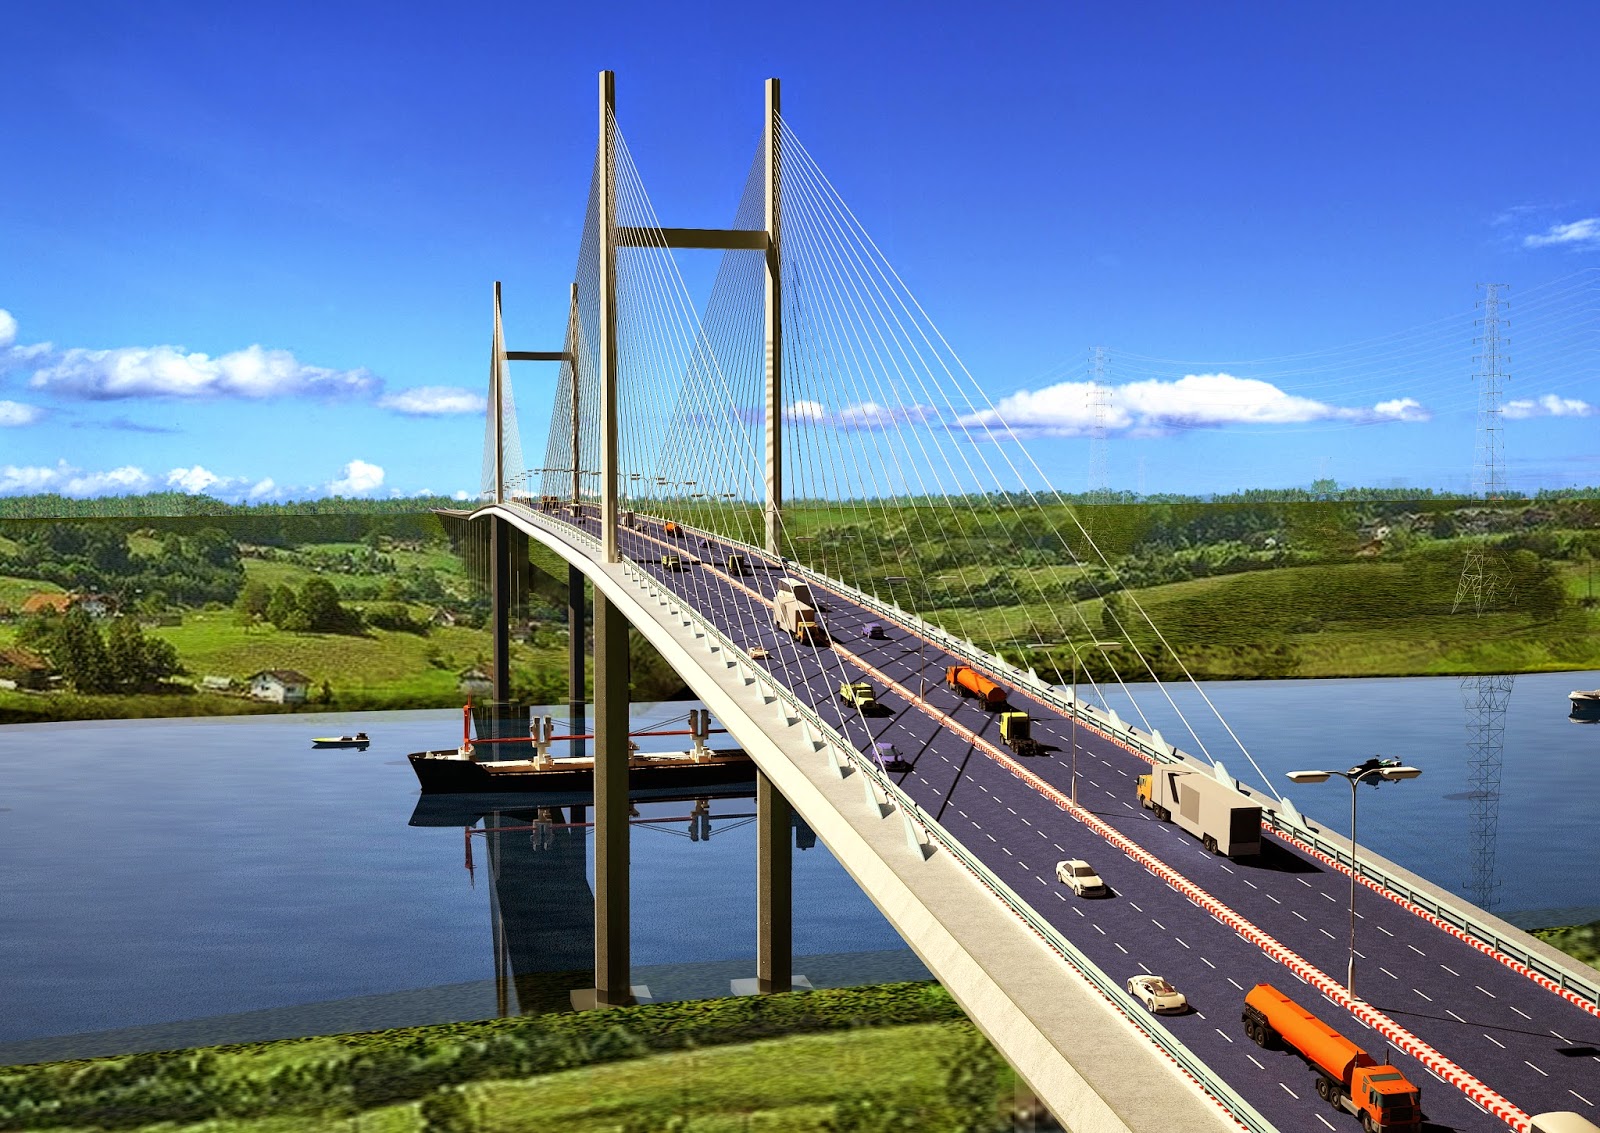 The Cat Lai Bridge project will be supervised by HCM City and Dong Nai Province authorities. (Photo: vietnamnet.vn)